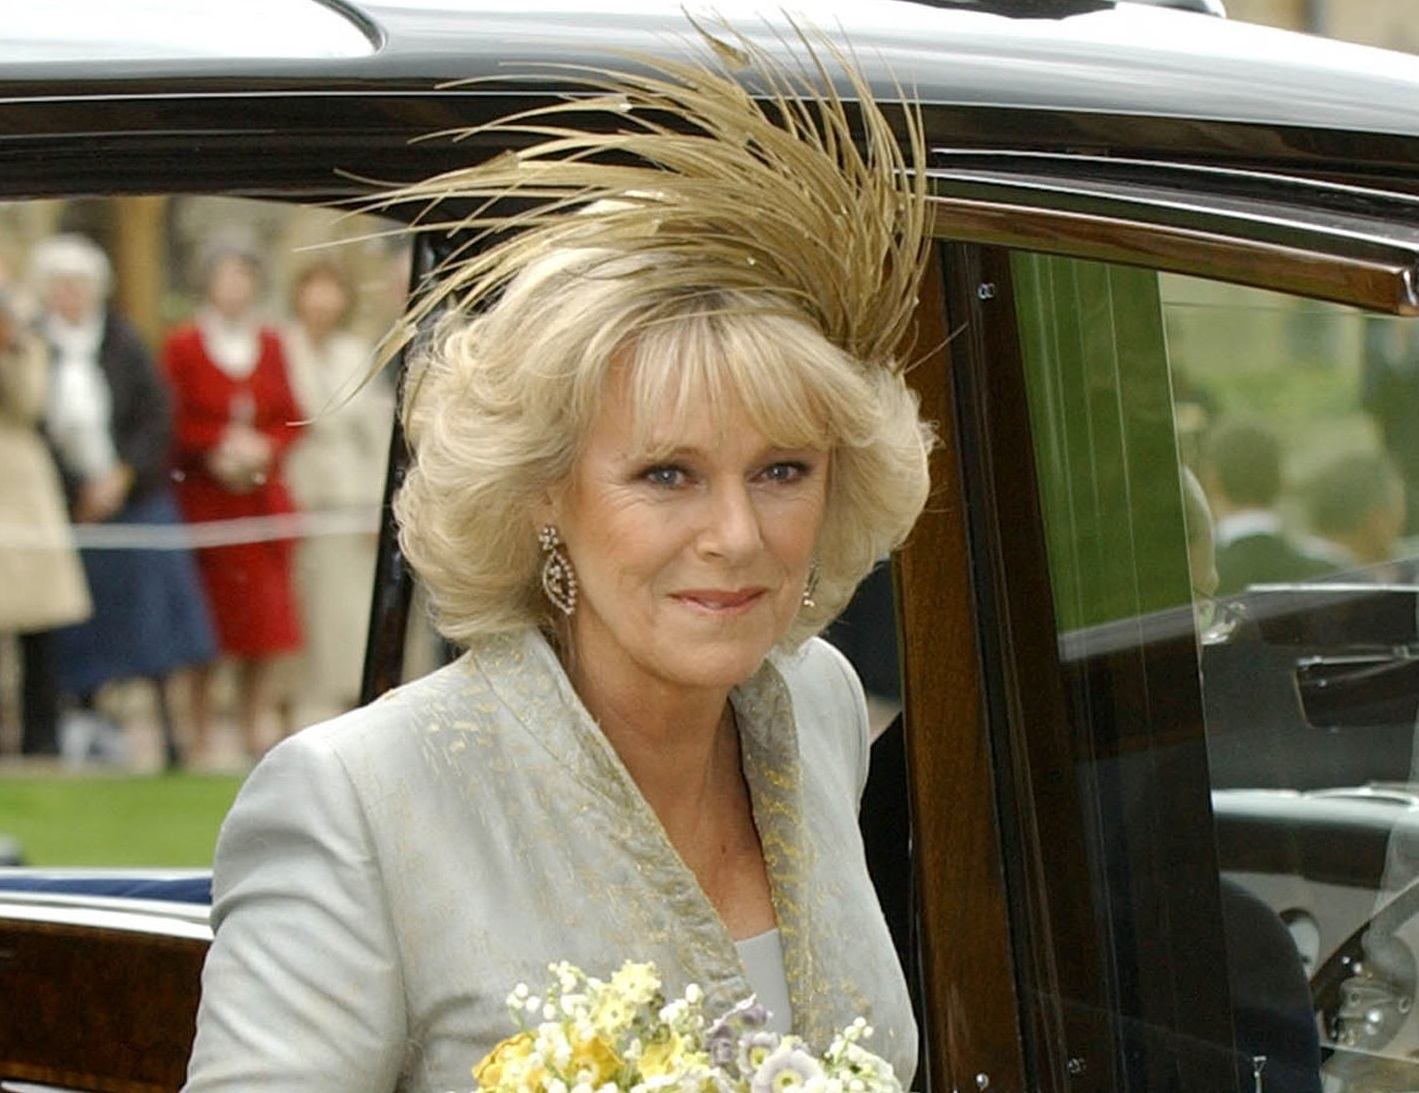 The Duchess of Cornwall, formerly Camilla Parker Bowles, arrives at St Georges Chapel in Windsor Castle after her civil wedding to Prince Charles 09 April. Prince Charles and his longtime sweetheart Camilla Parker Bowles married today after two months of muddled preparations and a lifetime of waiting.